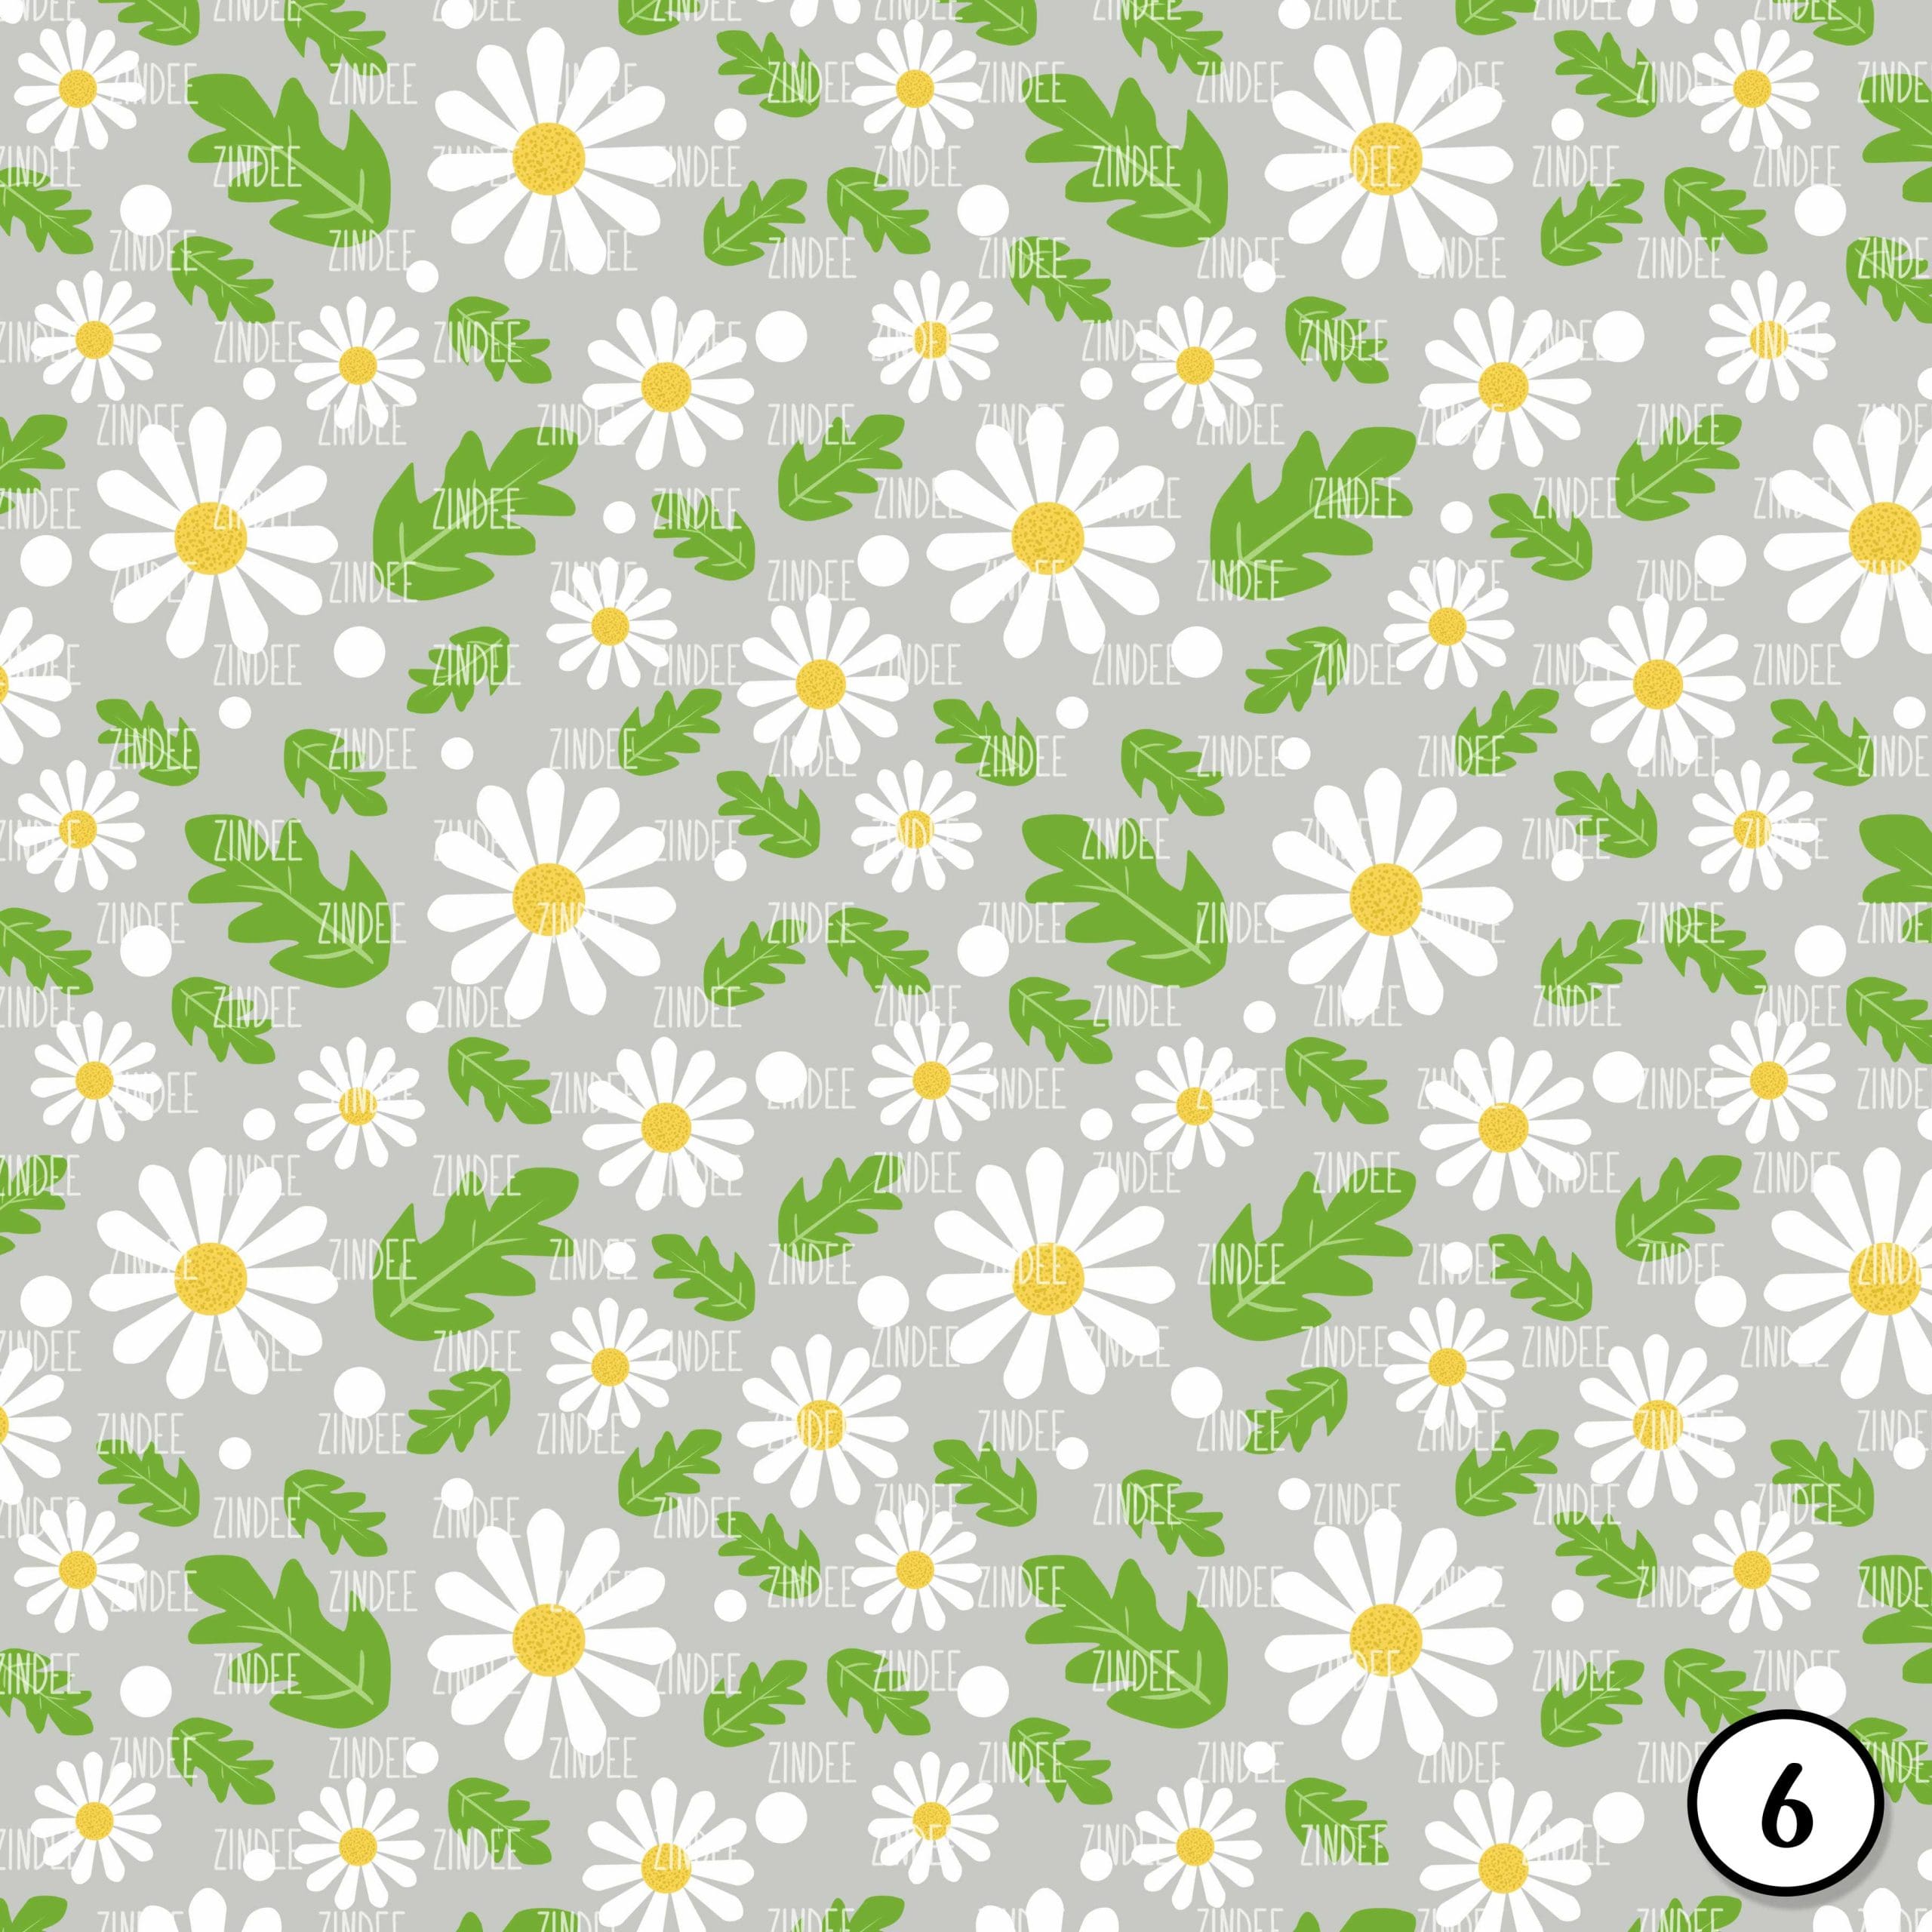 Daisy Blooms (vinyl) – Acrylic Blanks, Stickers, Printed Vinyl, Glitter and  more!